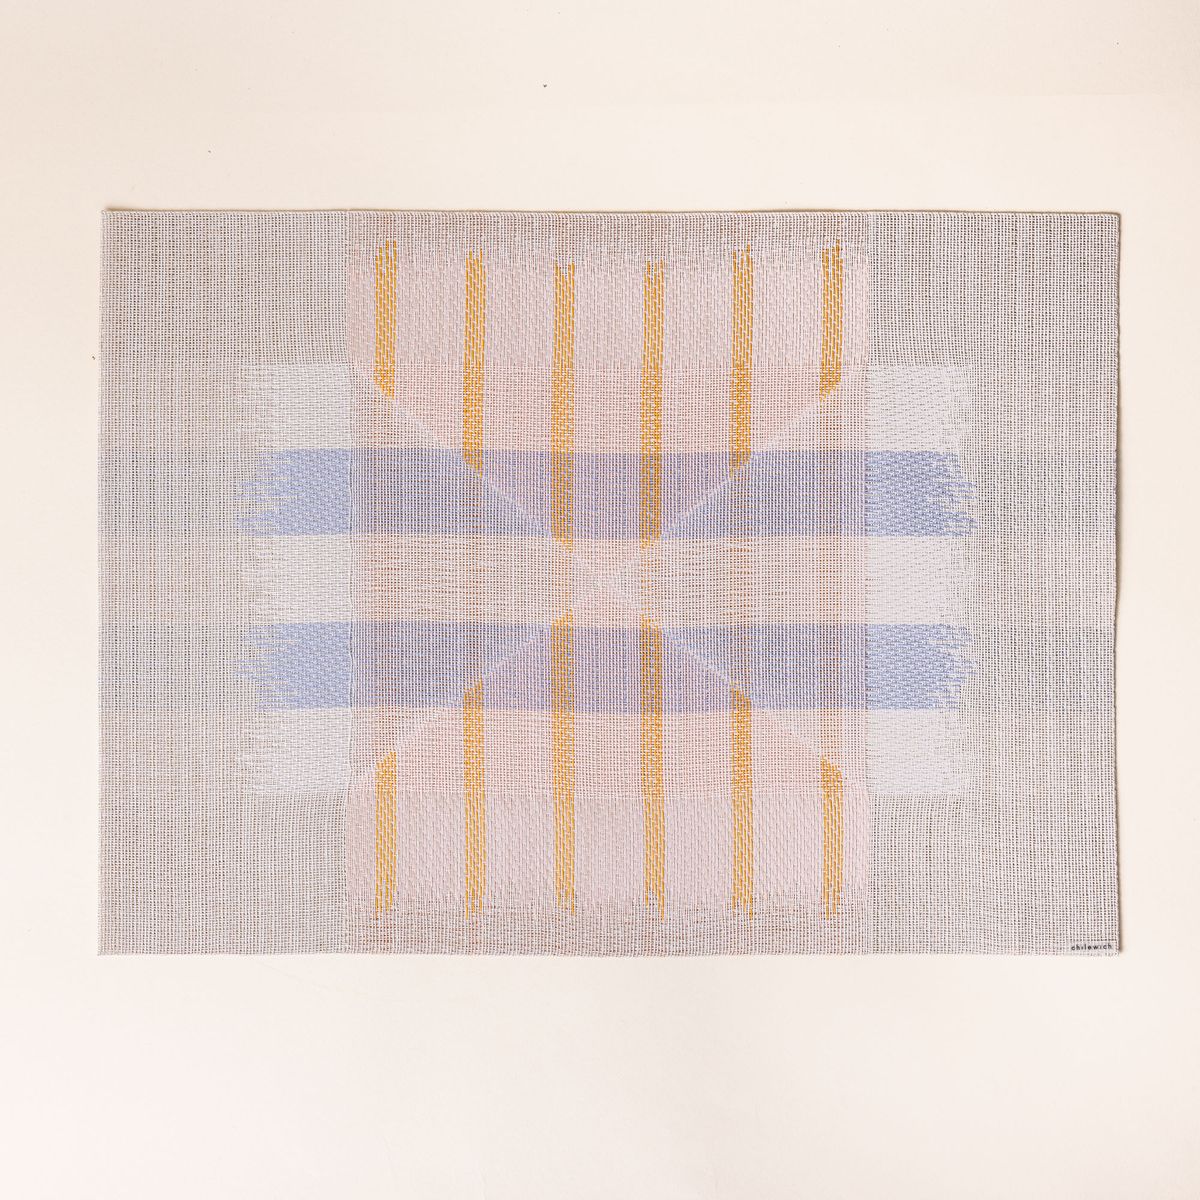 A placemat with a soft artful geometric design featuring neutral, orange, white, and blue colors